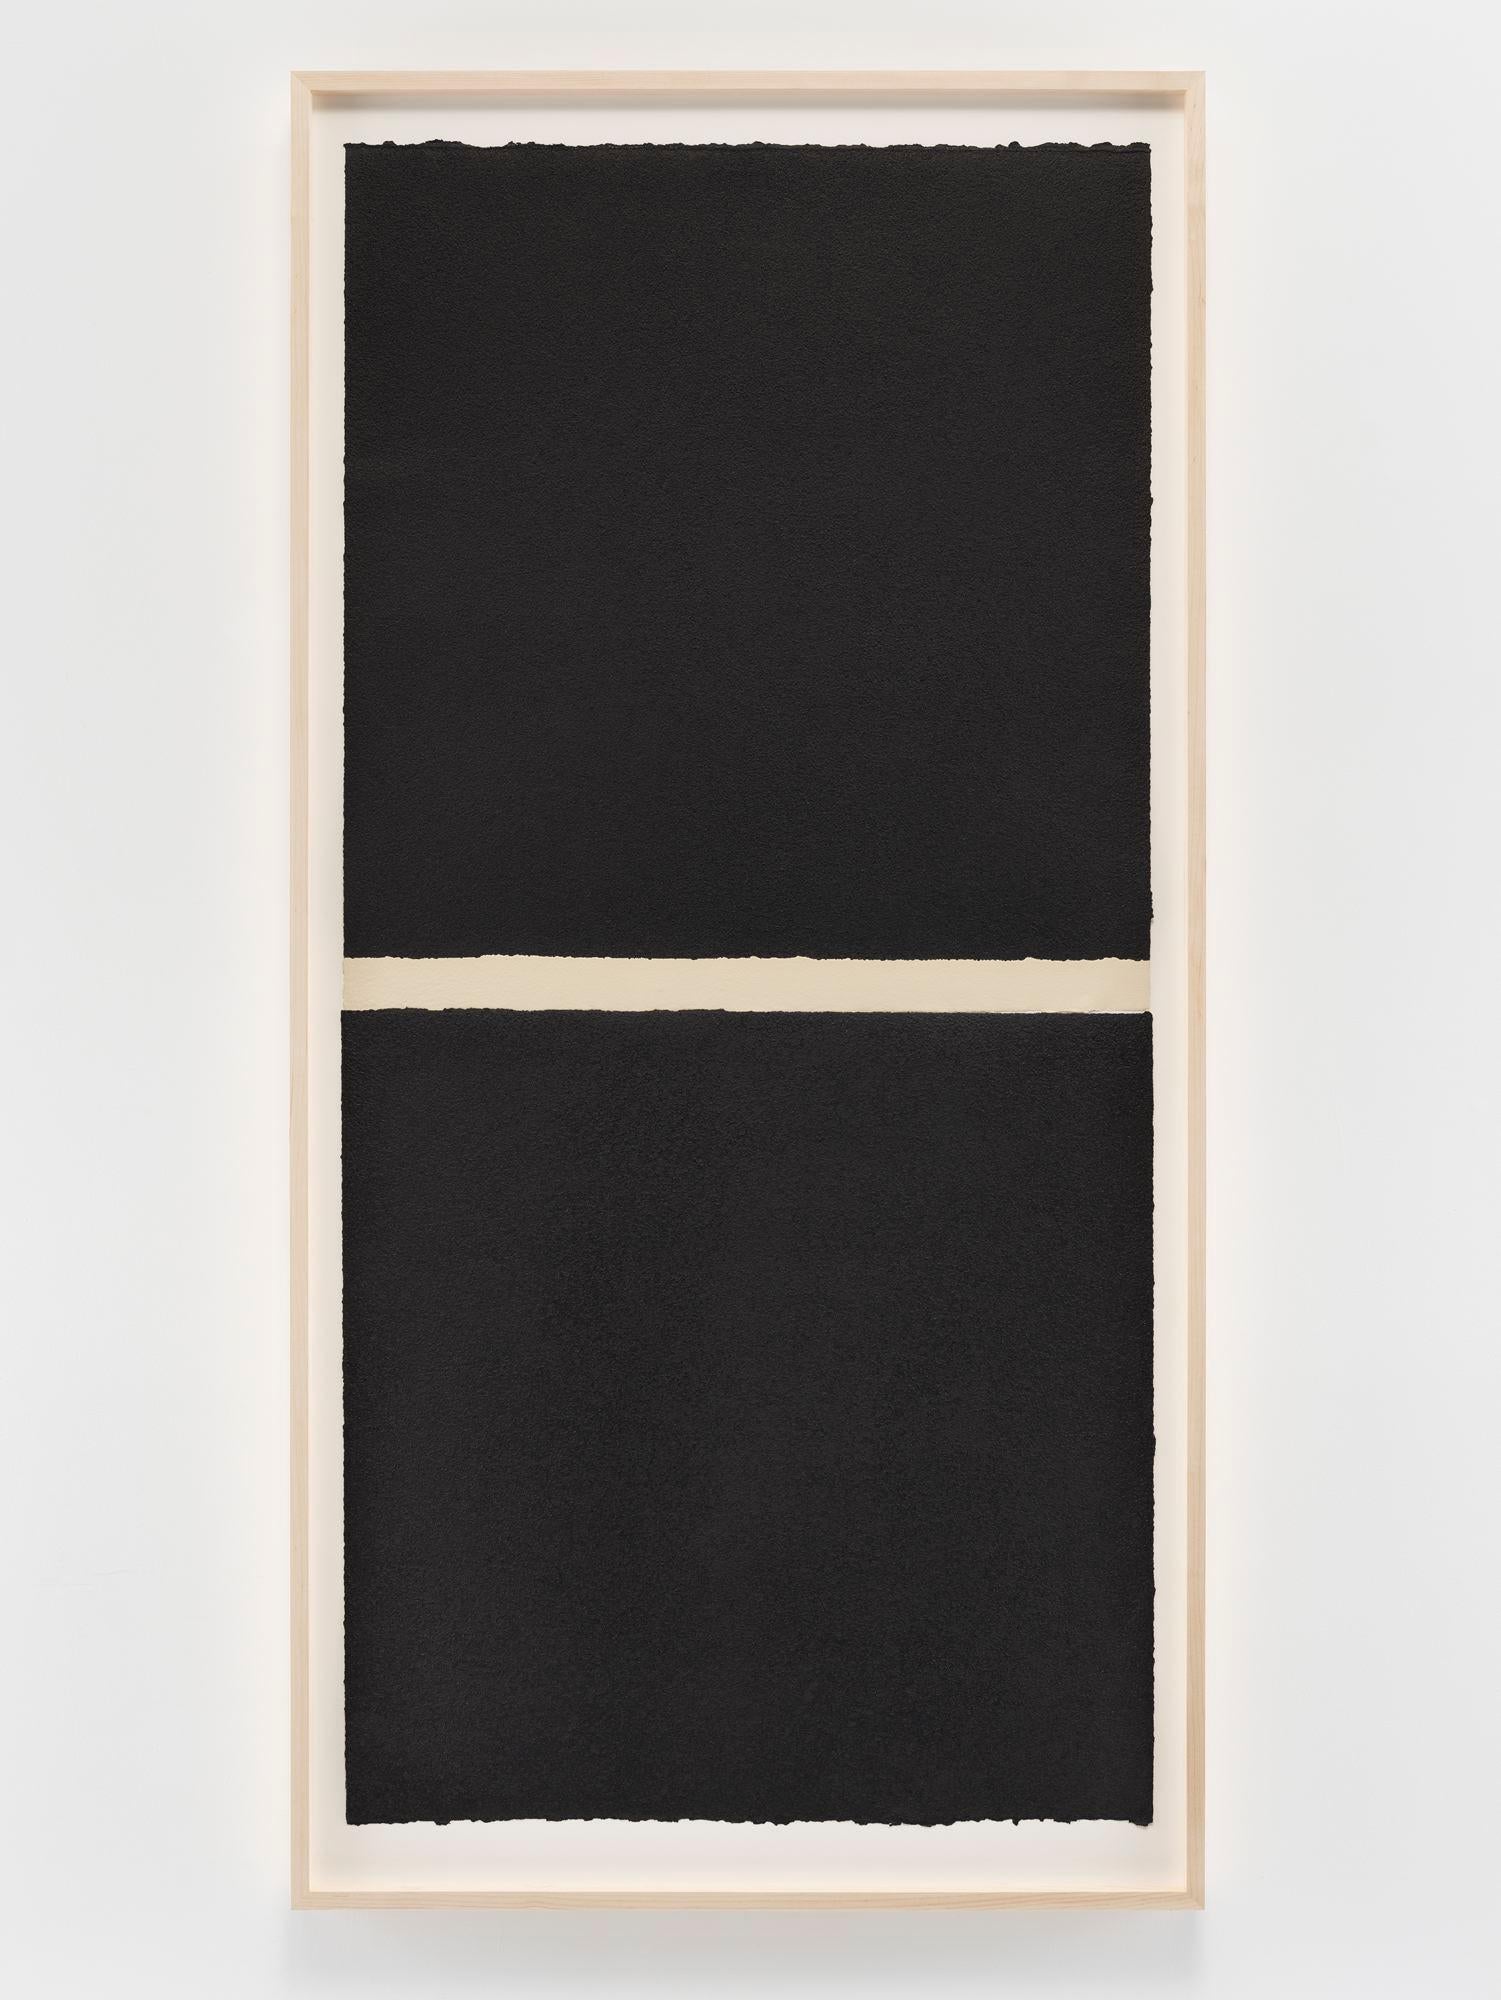 Richard Serra
WM II
1995
Etching and aquatint on Watson Handmade paper
Print: 66 x 32 inches; 168 x 81 cm
Frame: 71 1/2 x 35 5/8 inches; 182 x 90 cm
Edition of 28
Signed, dated, and inscribed in graphite (verso)

Available from Matthew Marks